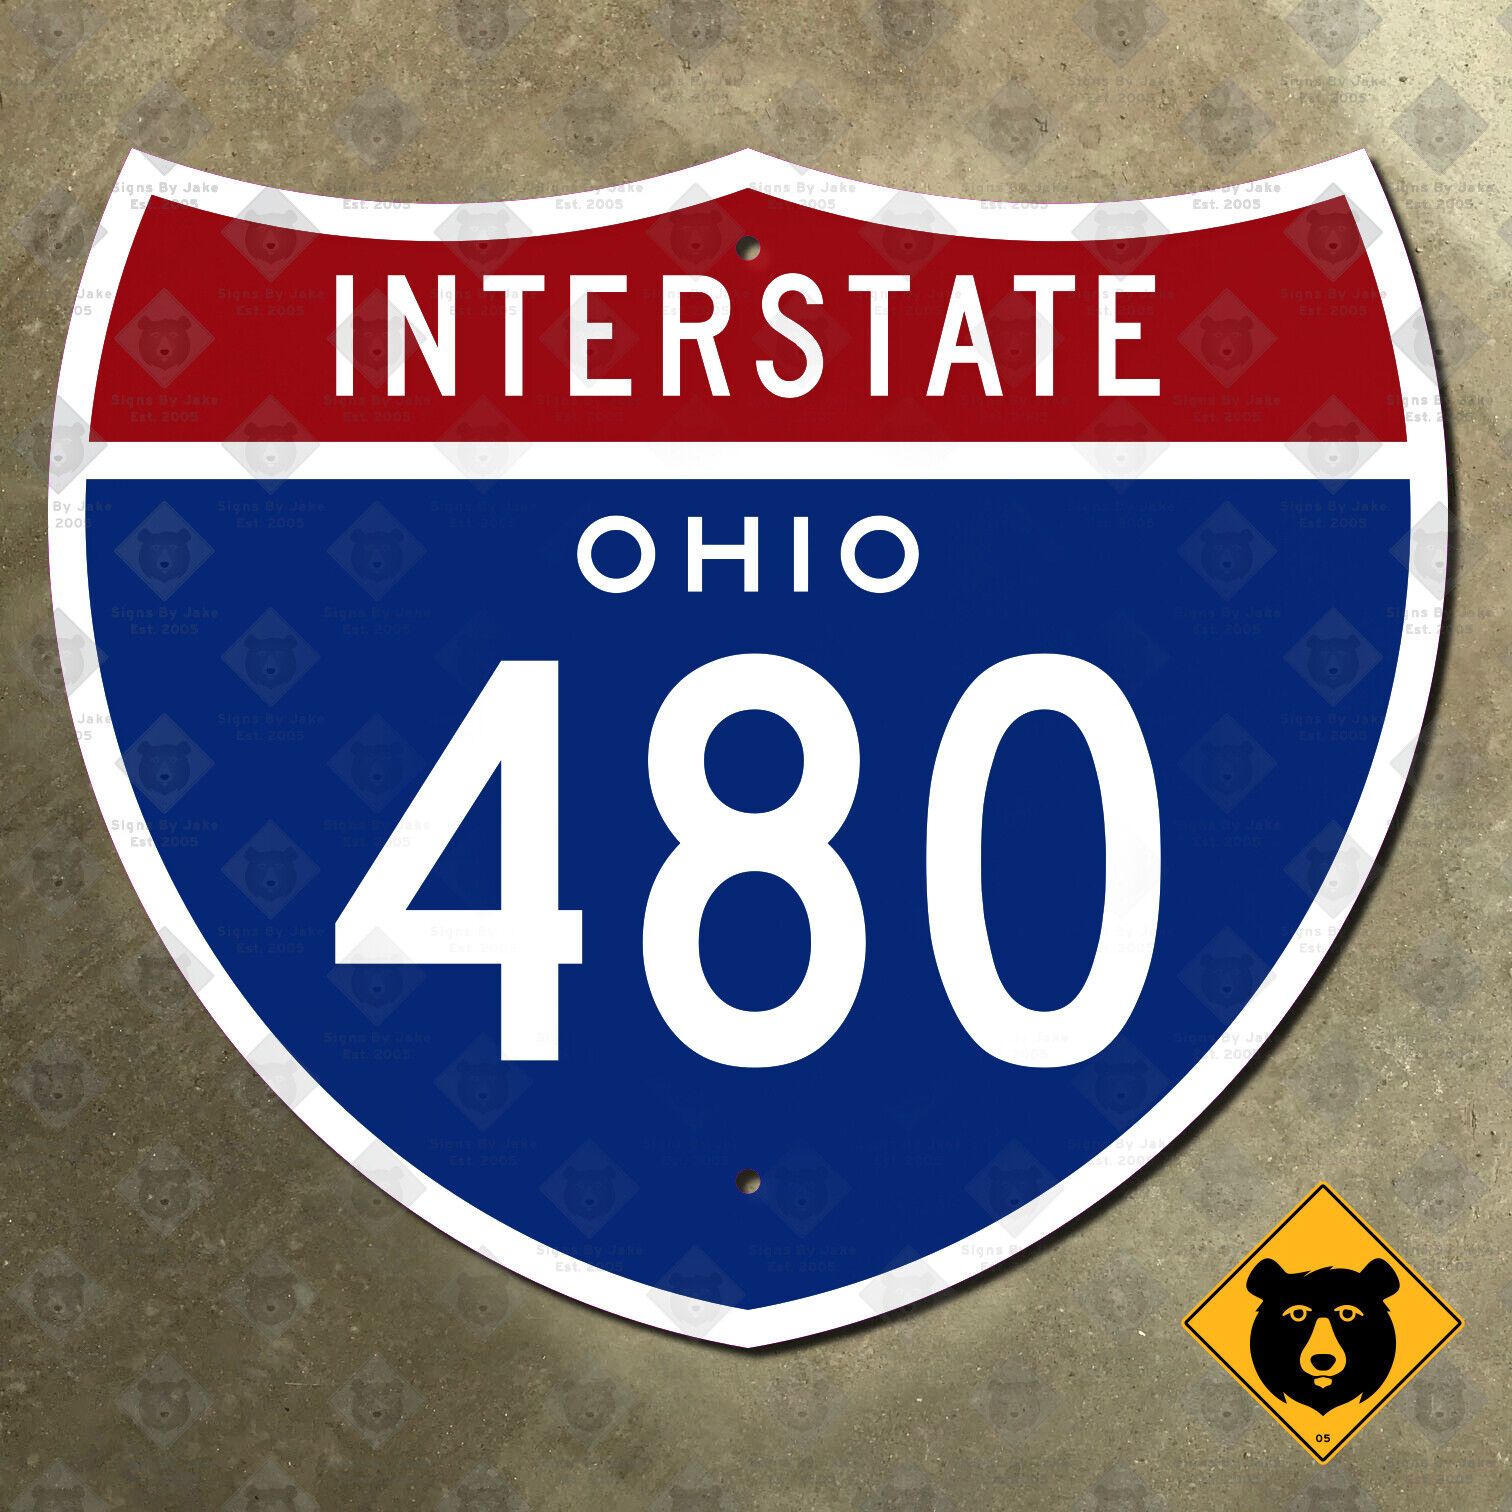 Ohio Interstate 480 highway shield marker road sign 1961 Cleveland 21x18